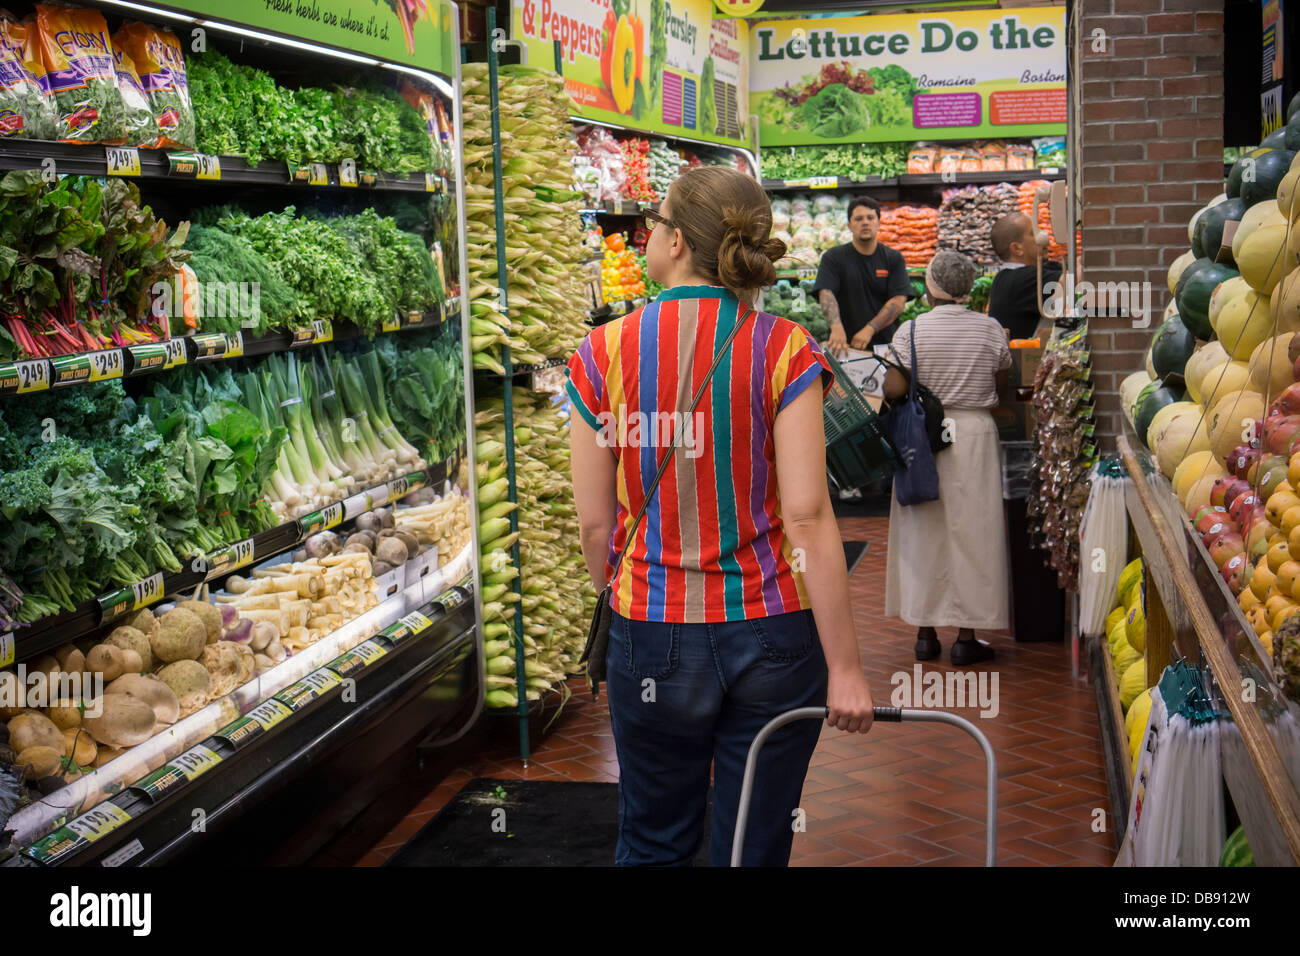 https://c8.alamy.com/comp/DB912W/shoppers-at-the-fairway-supermarket-in-the-chelsea-neighborhood-of-DB912W.jpg